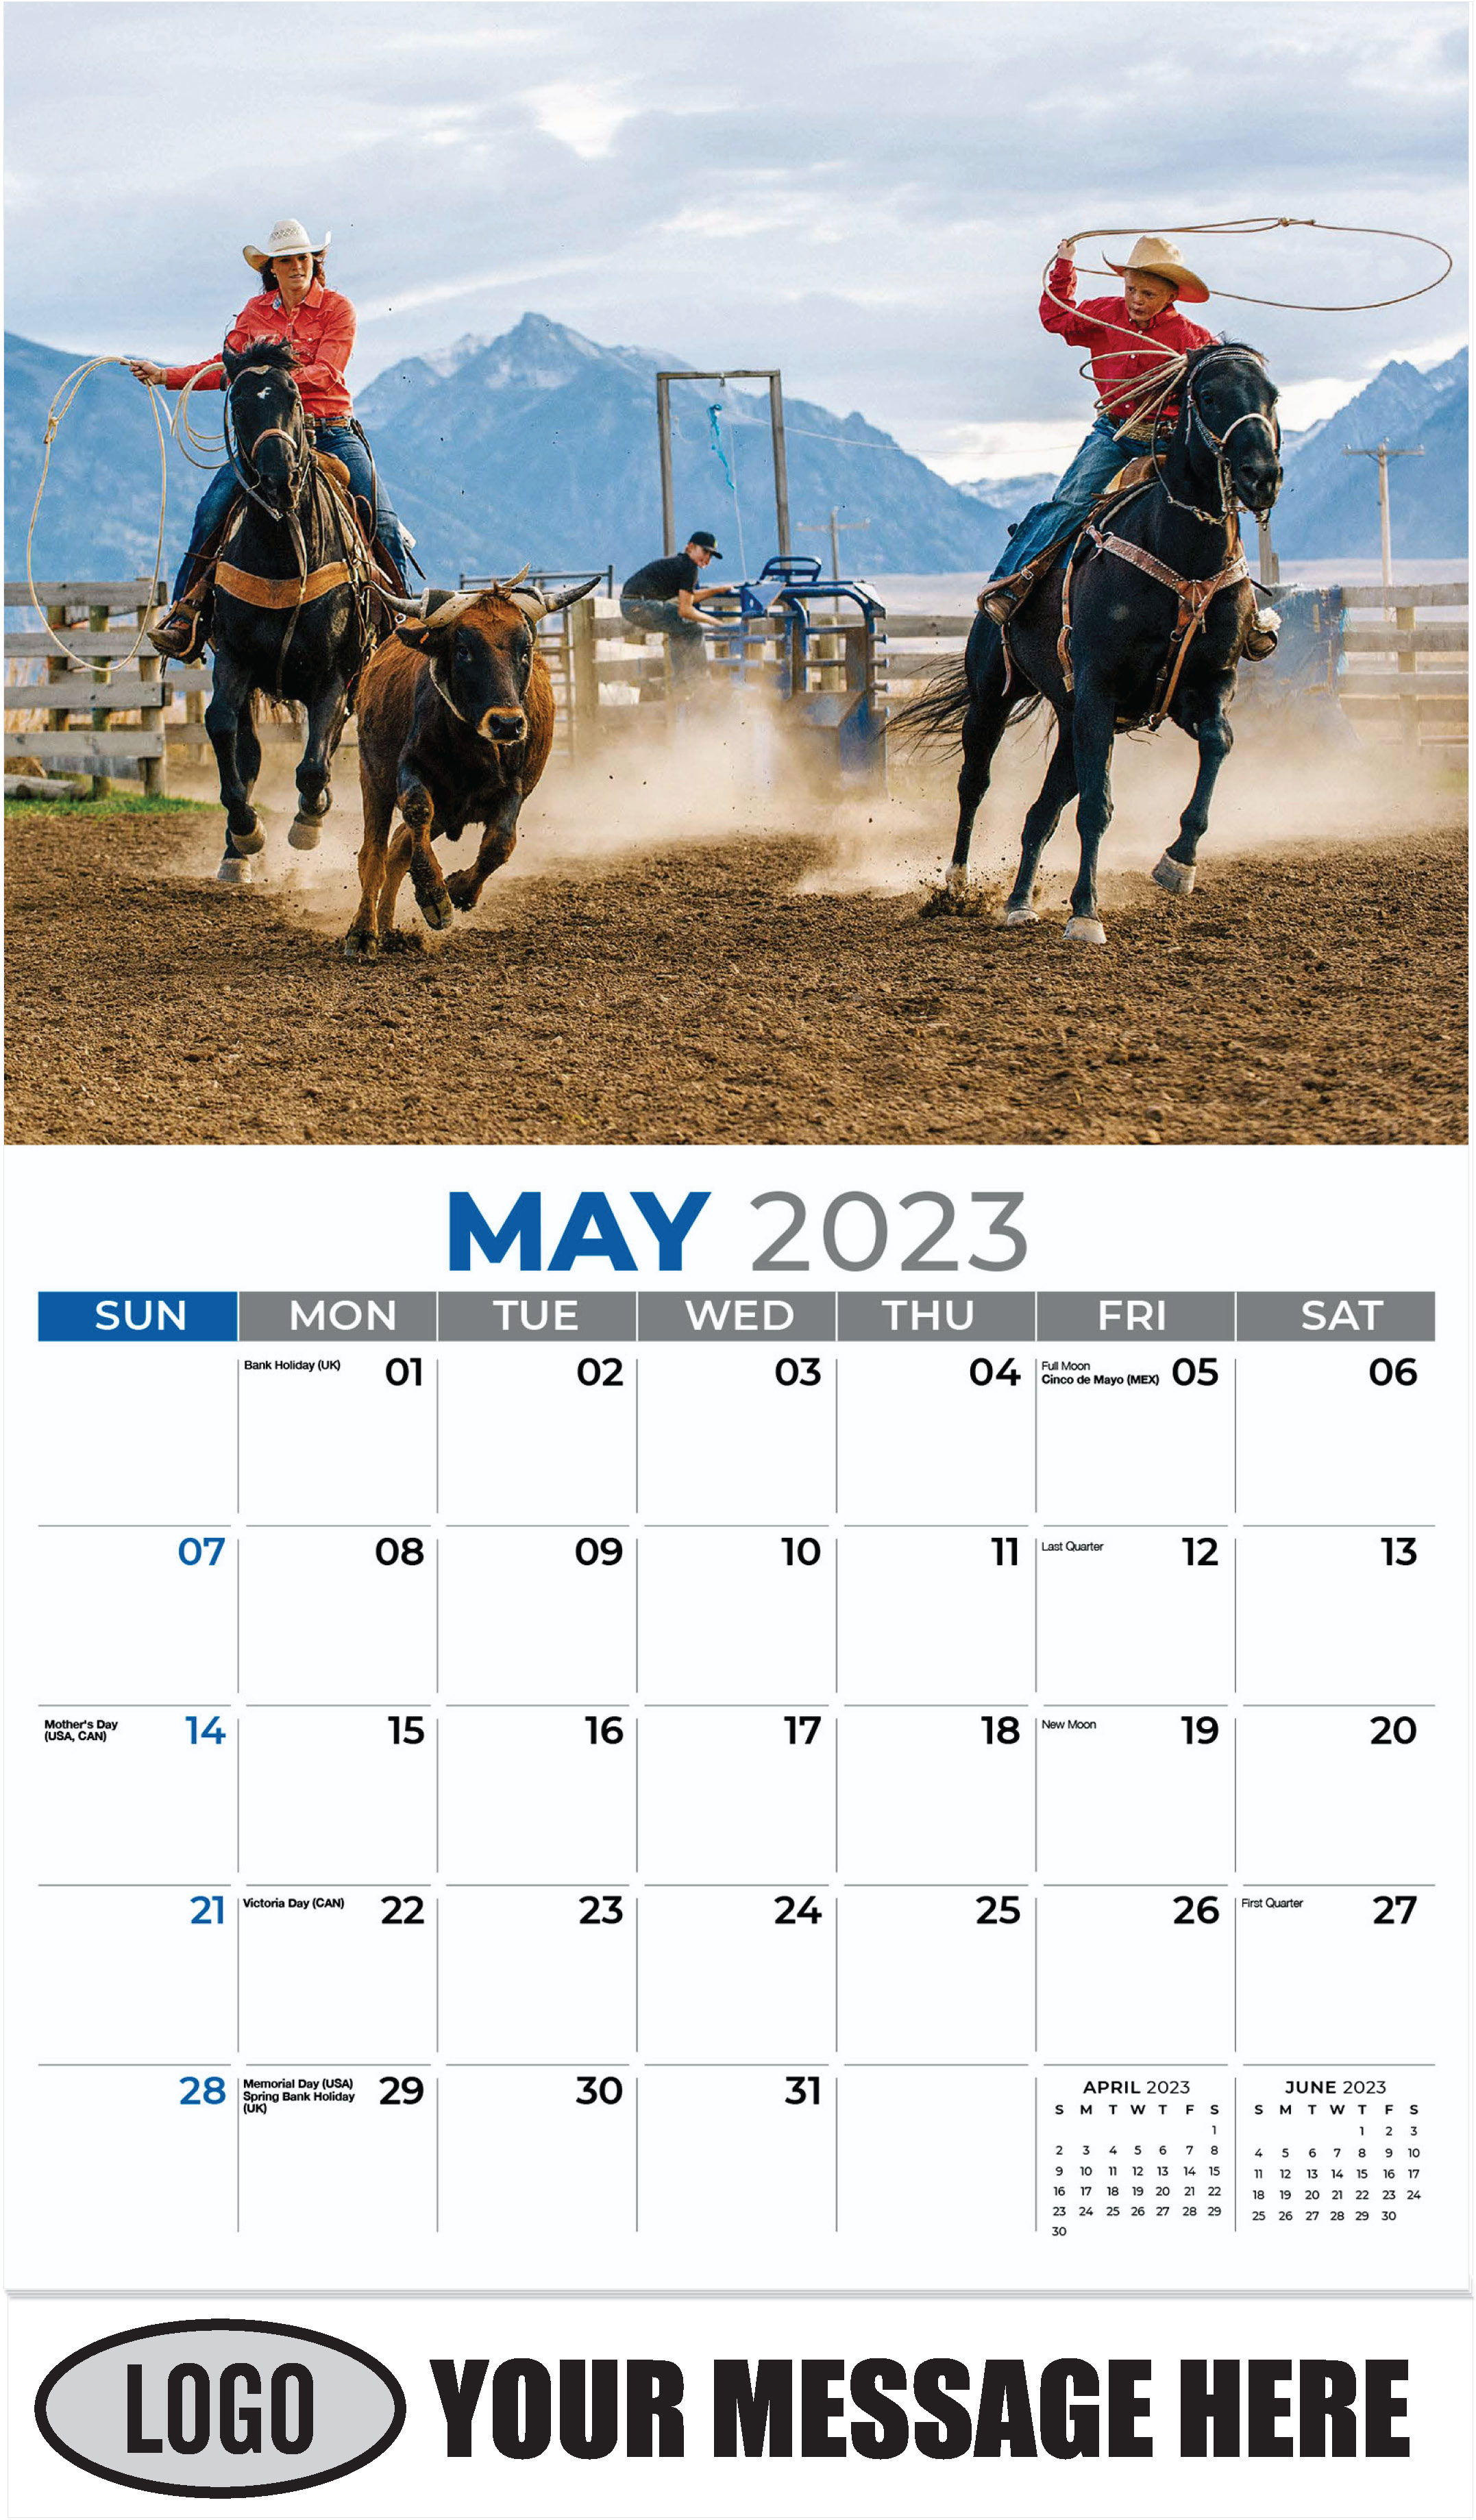 Mom and Son at Rodeo - May - Country Spirit 2023 Promotional Calendar